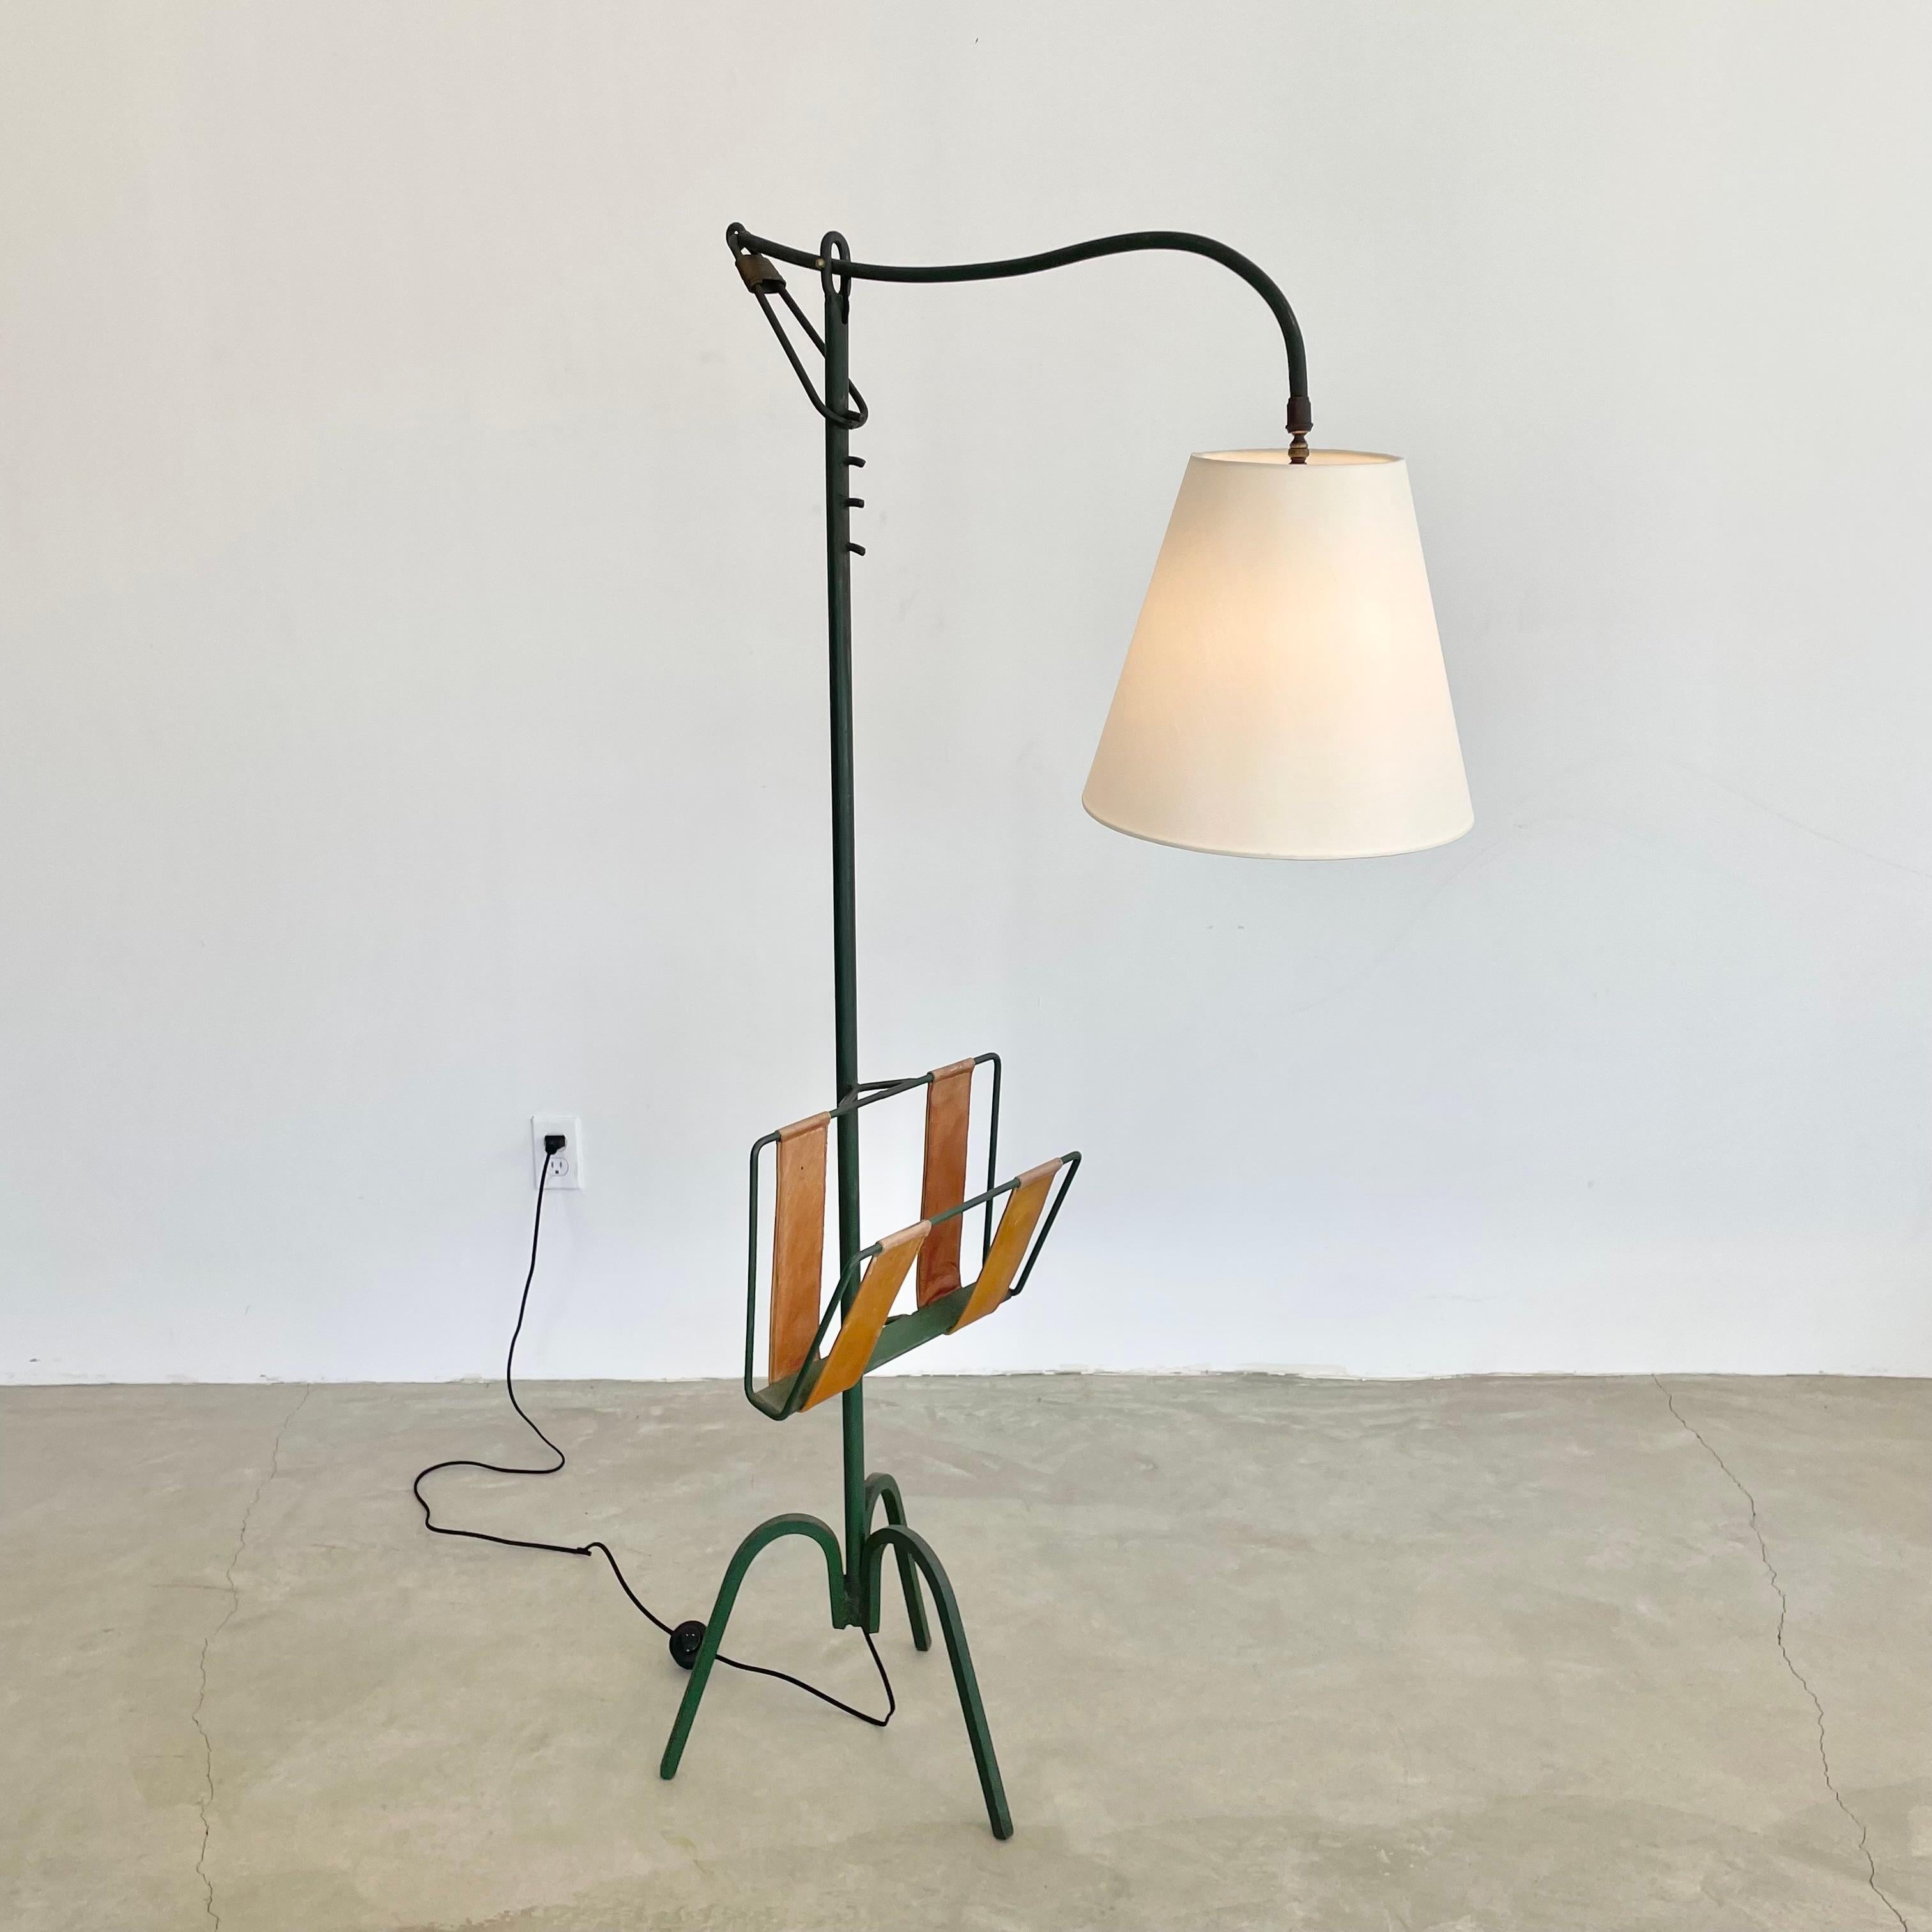 Adjustable Iron Floor Lamp in the style of Jacques Adnet, 1950s France For Sale 8